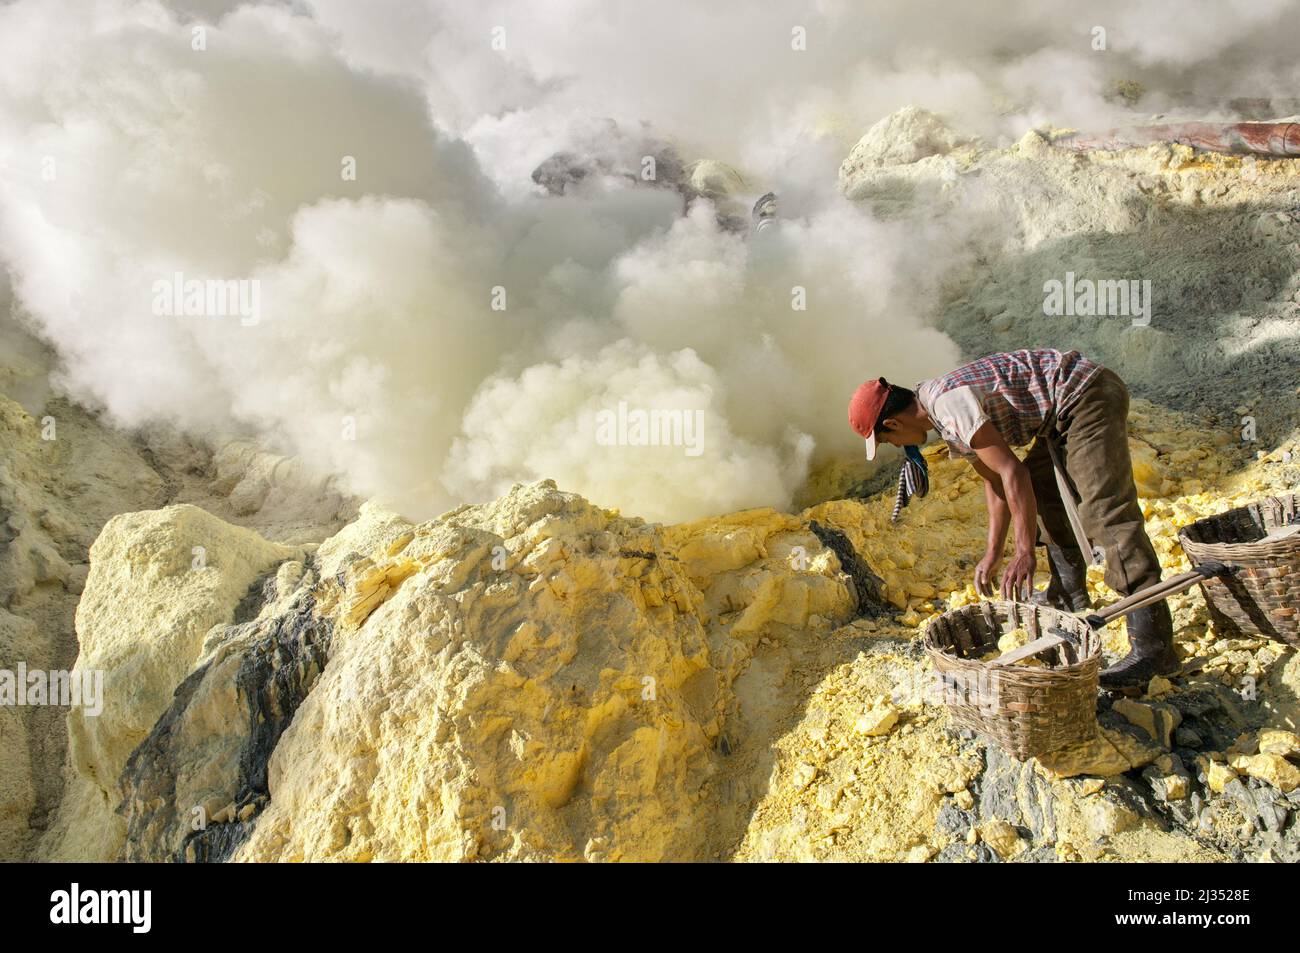 Miner filling his baskets with sulfur inside the crater of Ijen volcano, Java island, Indonesia Stock Photo